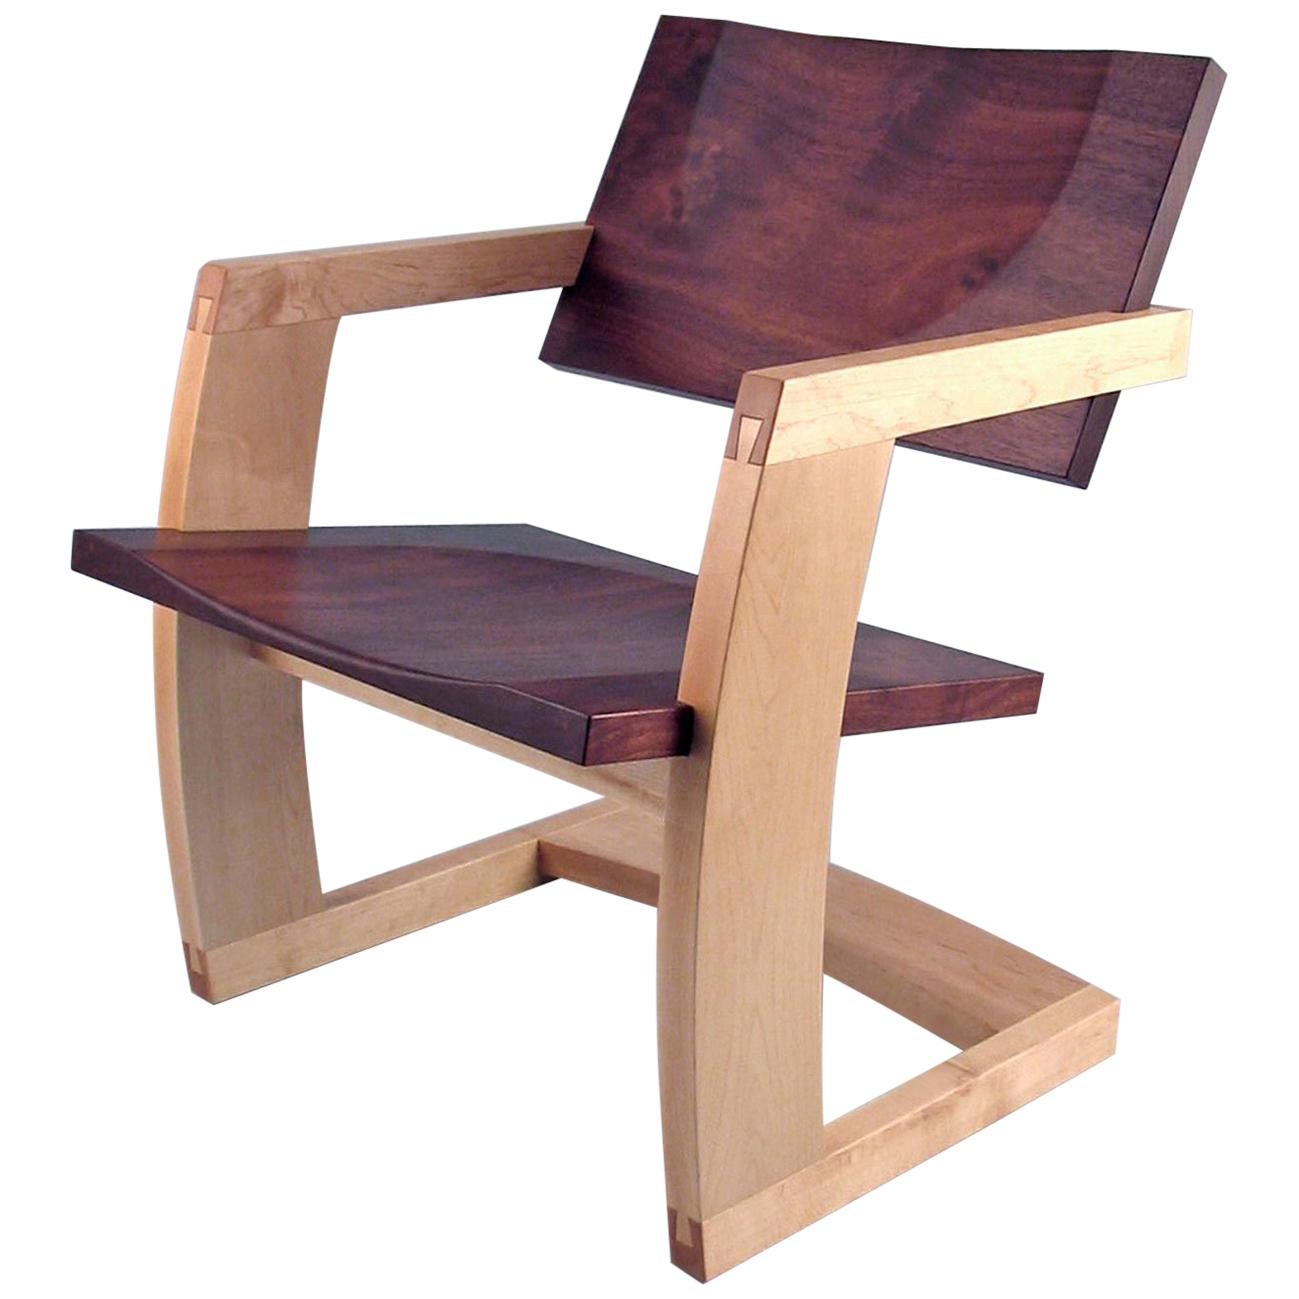 J. Rusten Studio-crafted Palo Alto Cantilevered Lounge Chair in Walnut and Maple For Sale